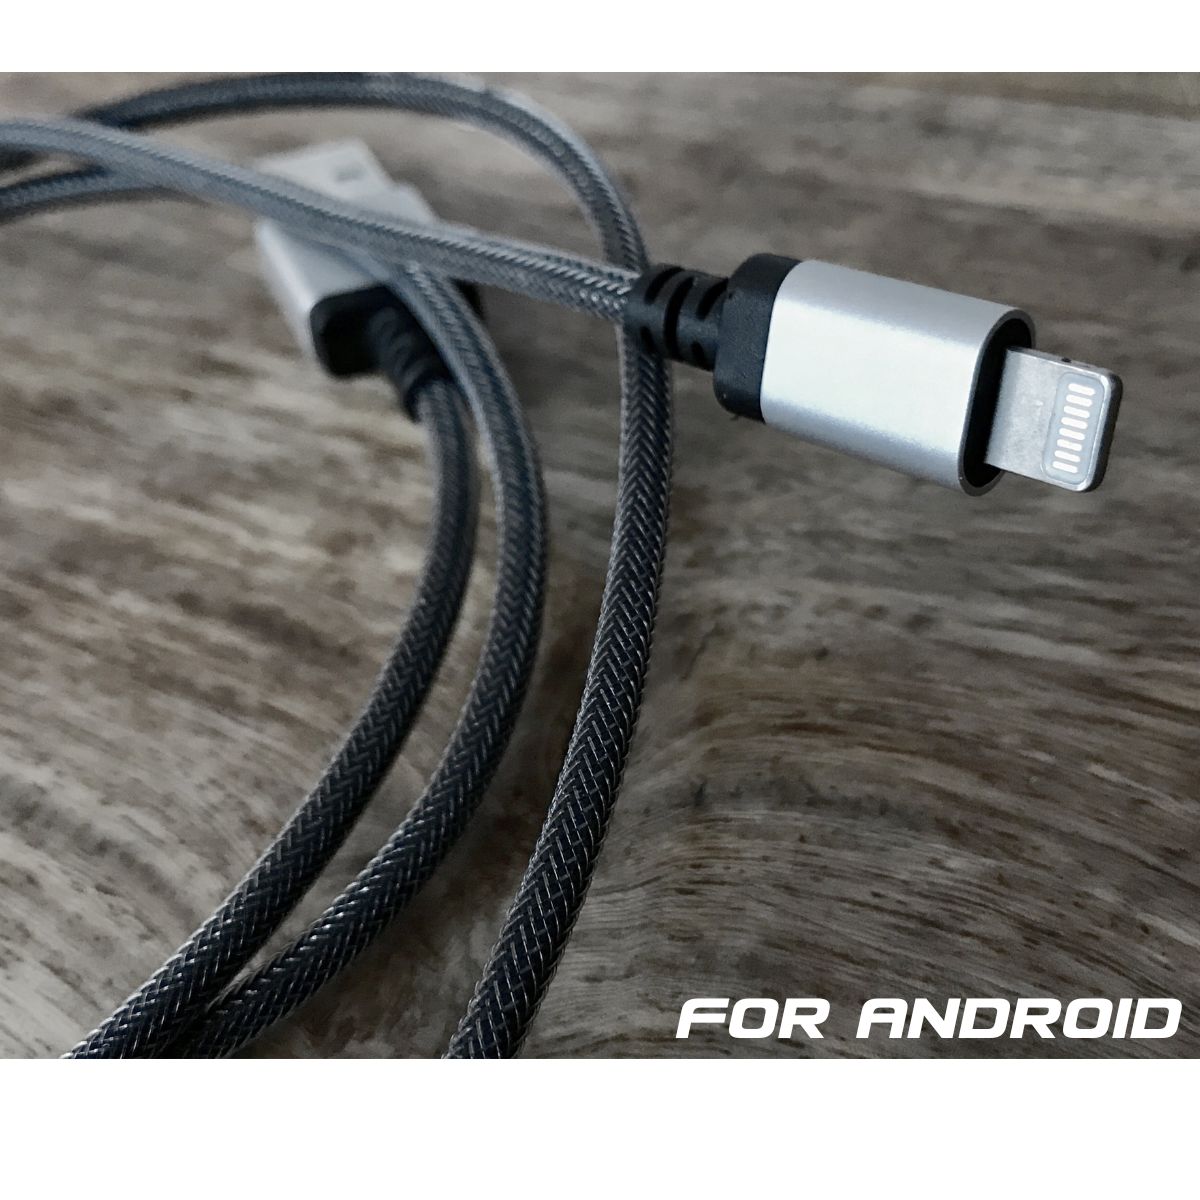 3 Metre USB Type C Data Charging Cable - Nylon Braided Heavy Duty | FOR ANDROID - South East Clearance Centre